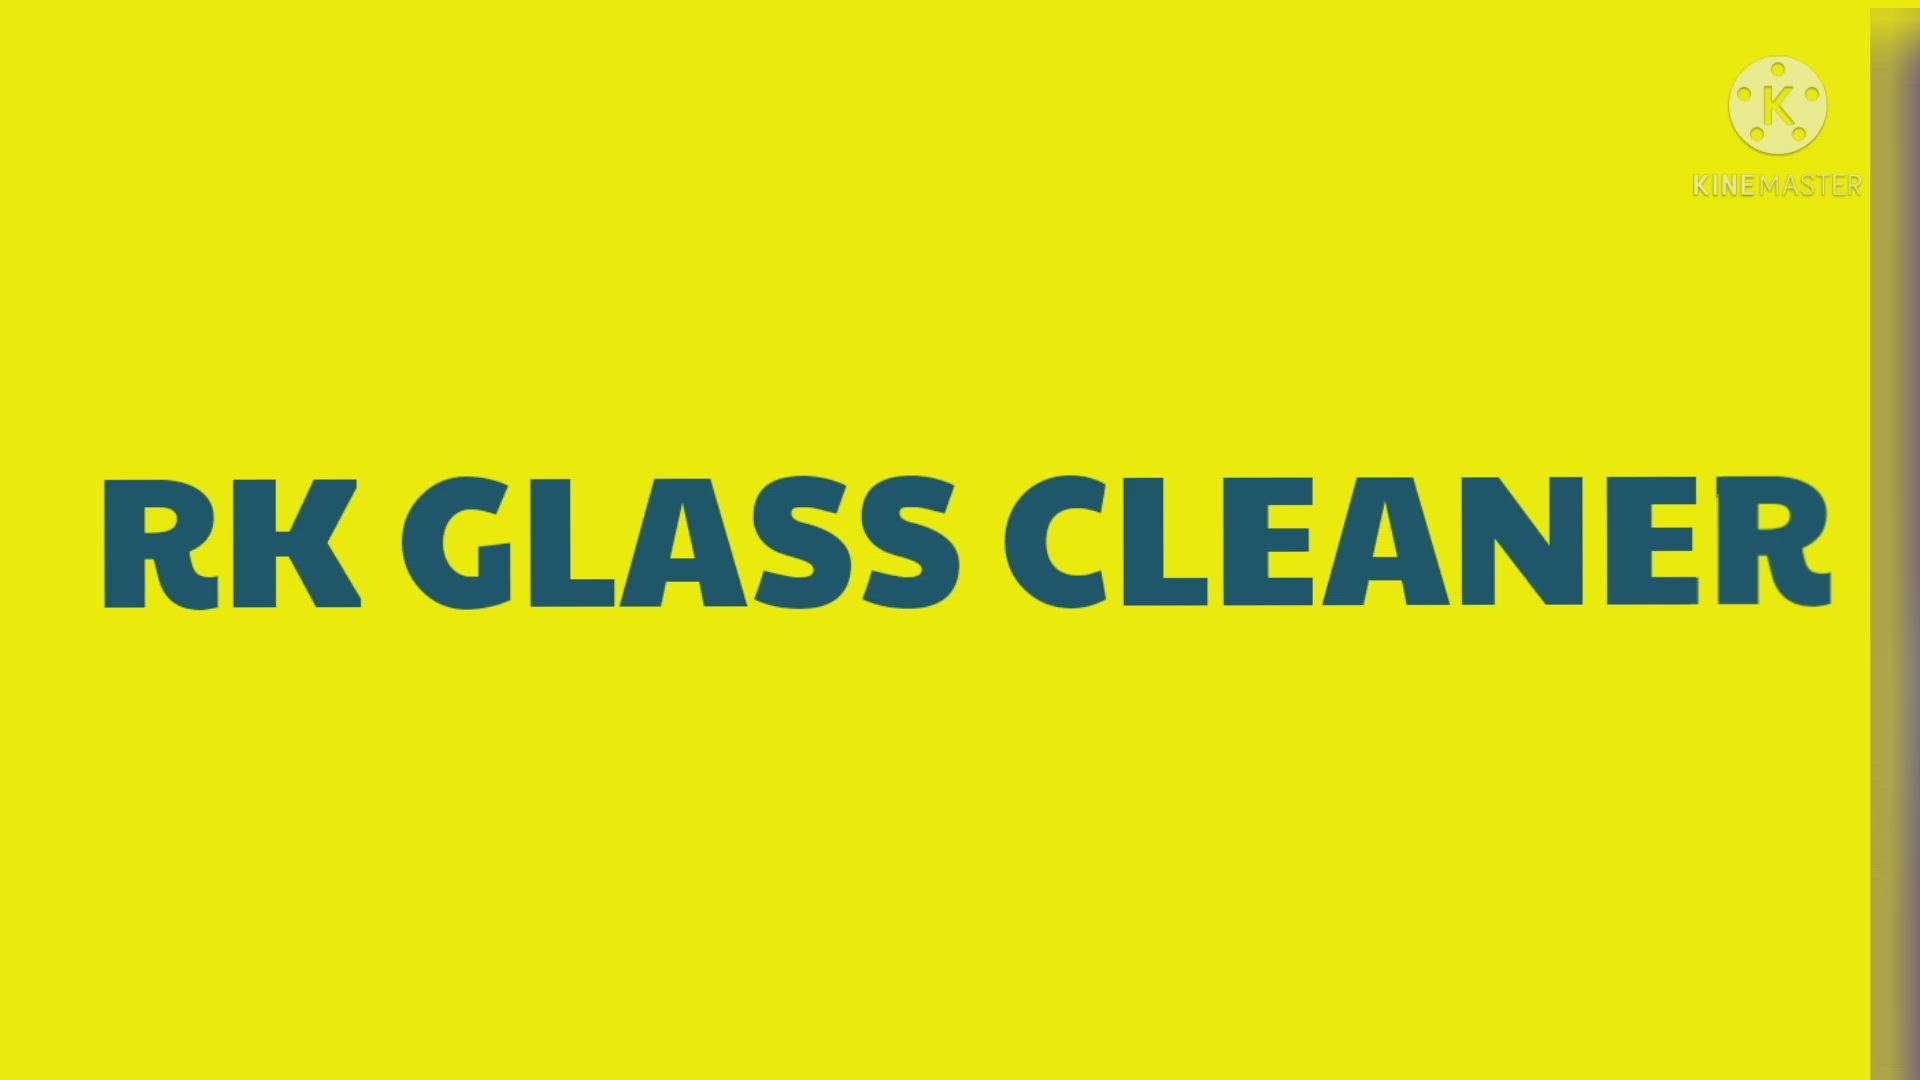 Faced Cleaning services
#rkglasscleaner